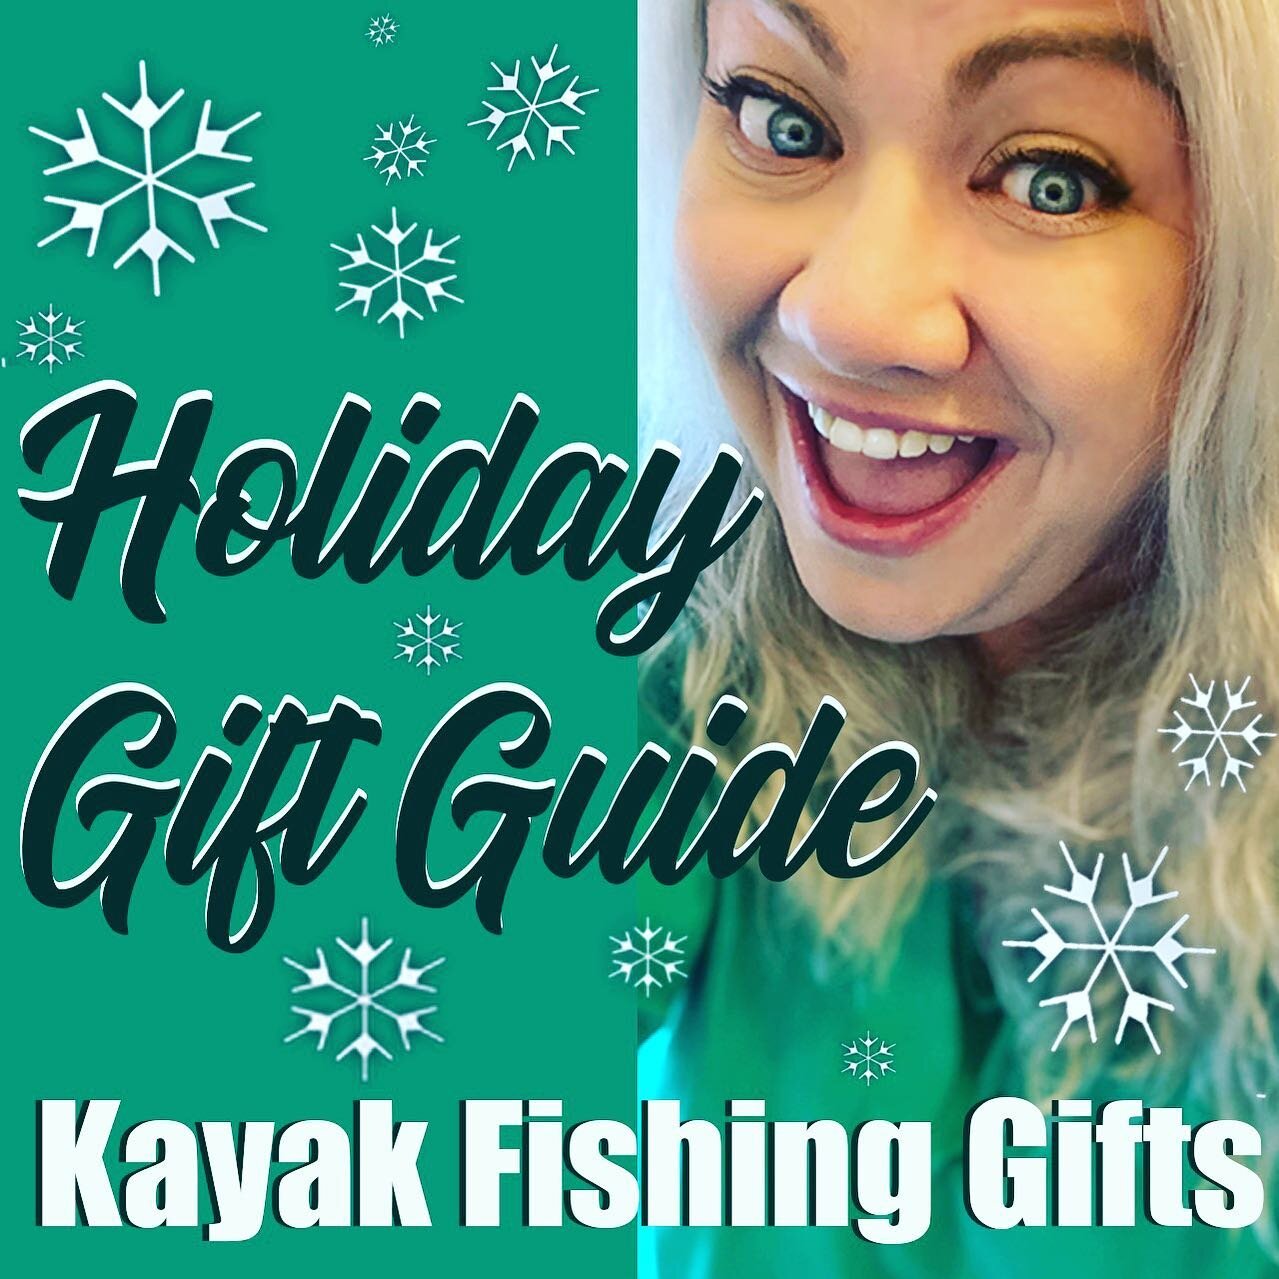 It&rsquo;s GIFTING TIME!! Check out our list of ten AWESOME gifts for the kayak angler in your life! There&rsquo;s something for everyone, in just about every price range. Video link in bio!! 

.
.

#fish #fishing #fishingislife #fishingdaily #fishin